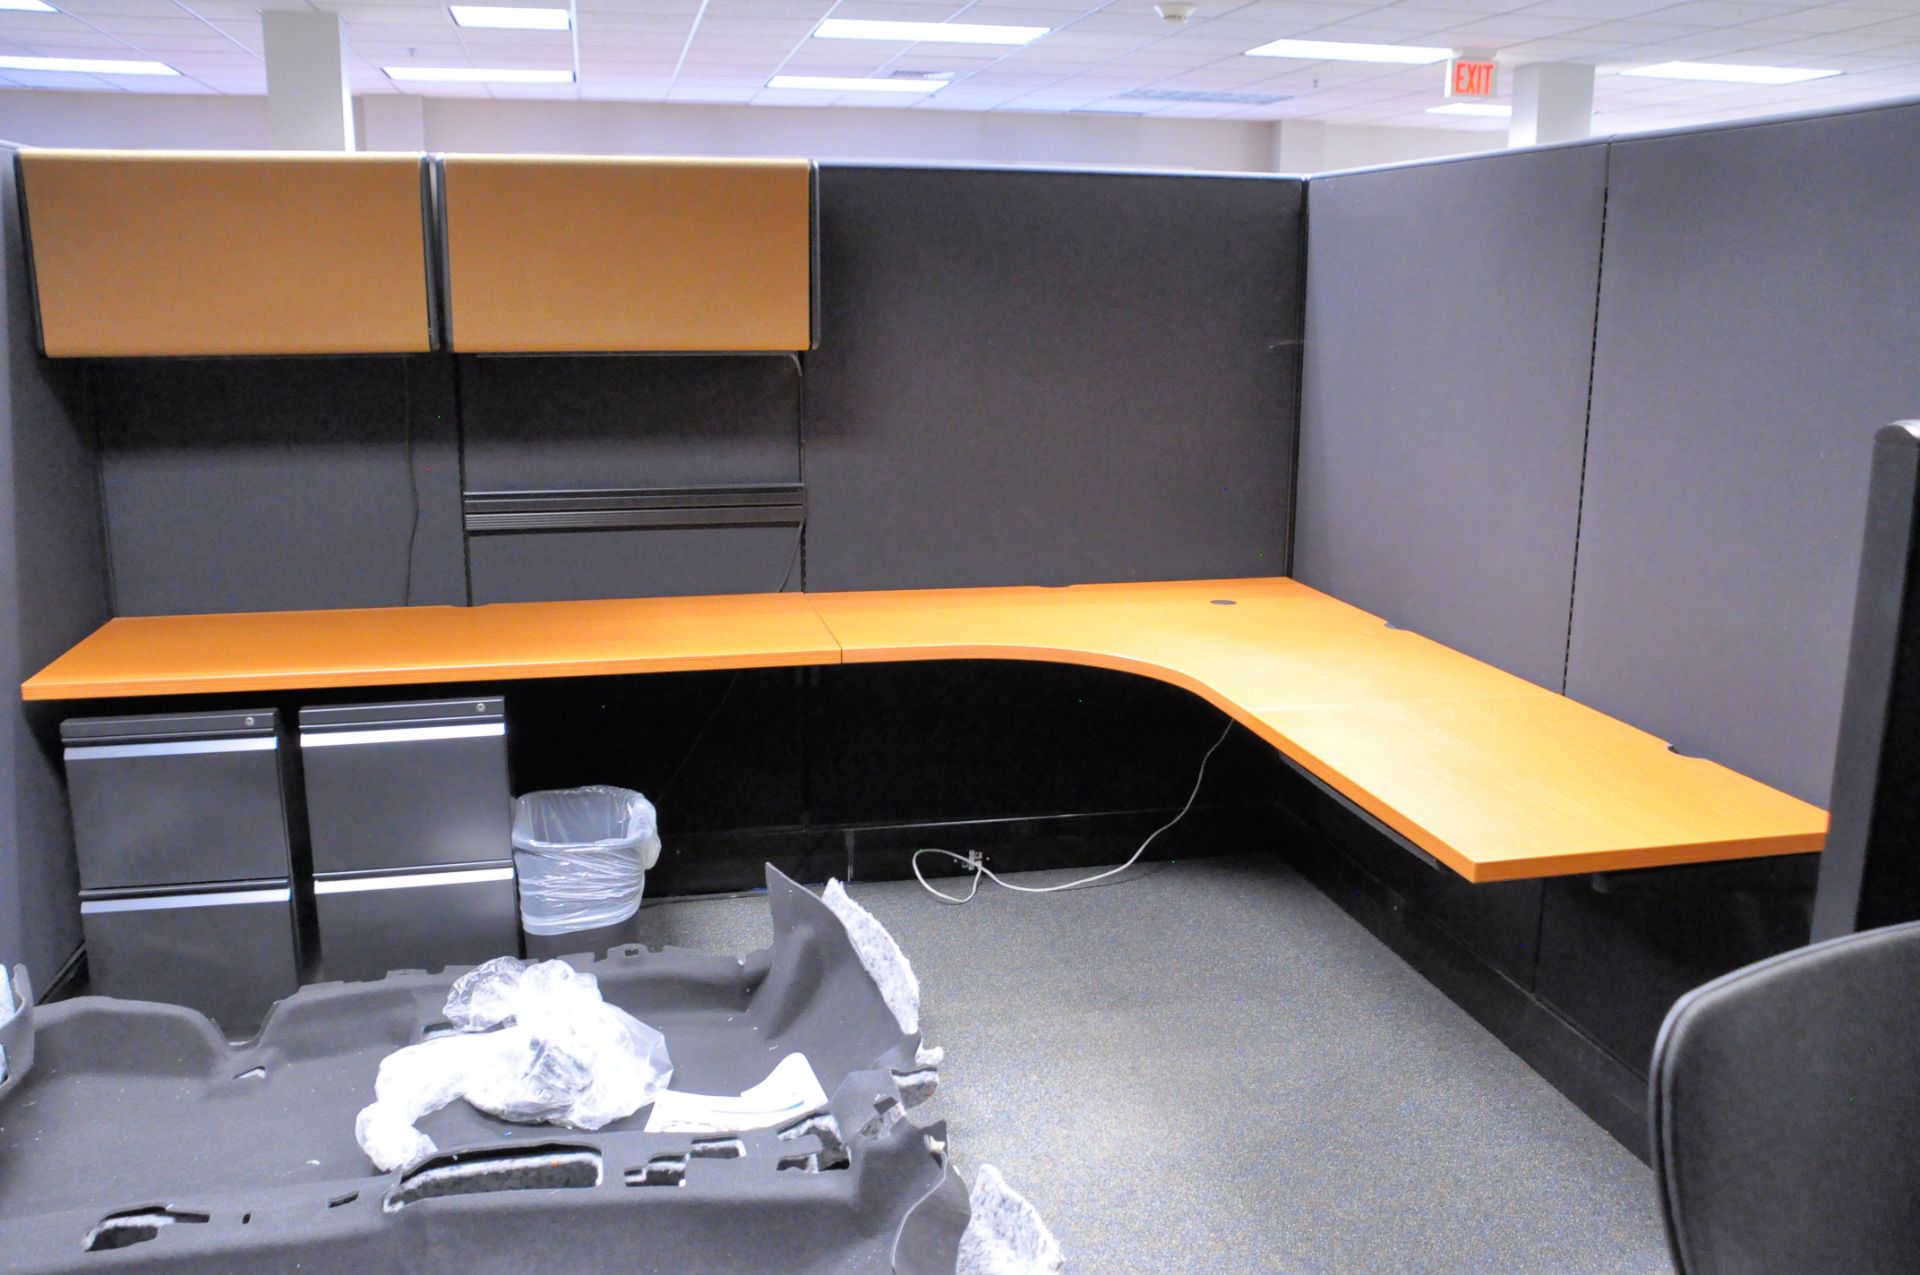 Lot-(1) Herman Miller 6-Station Cubicle Partition Work System with Standing Cabinets and Partition - Image 9 of 10